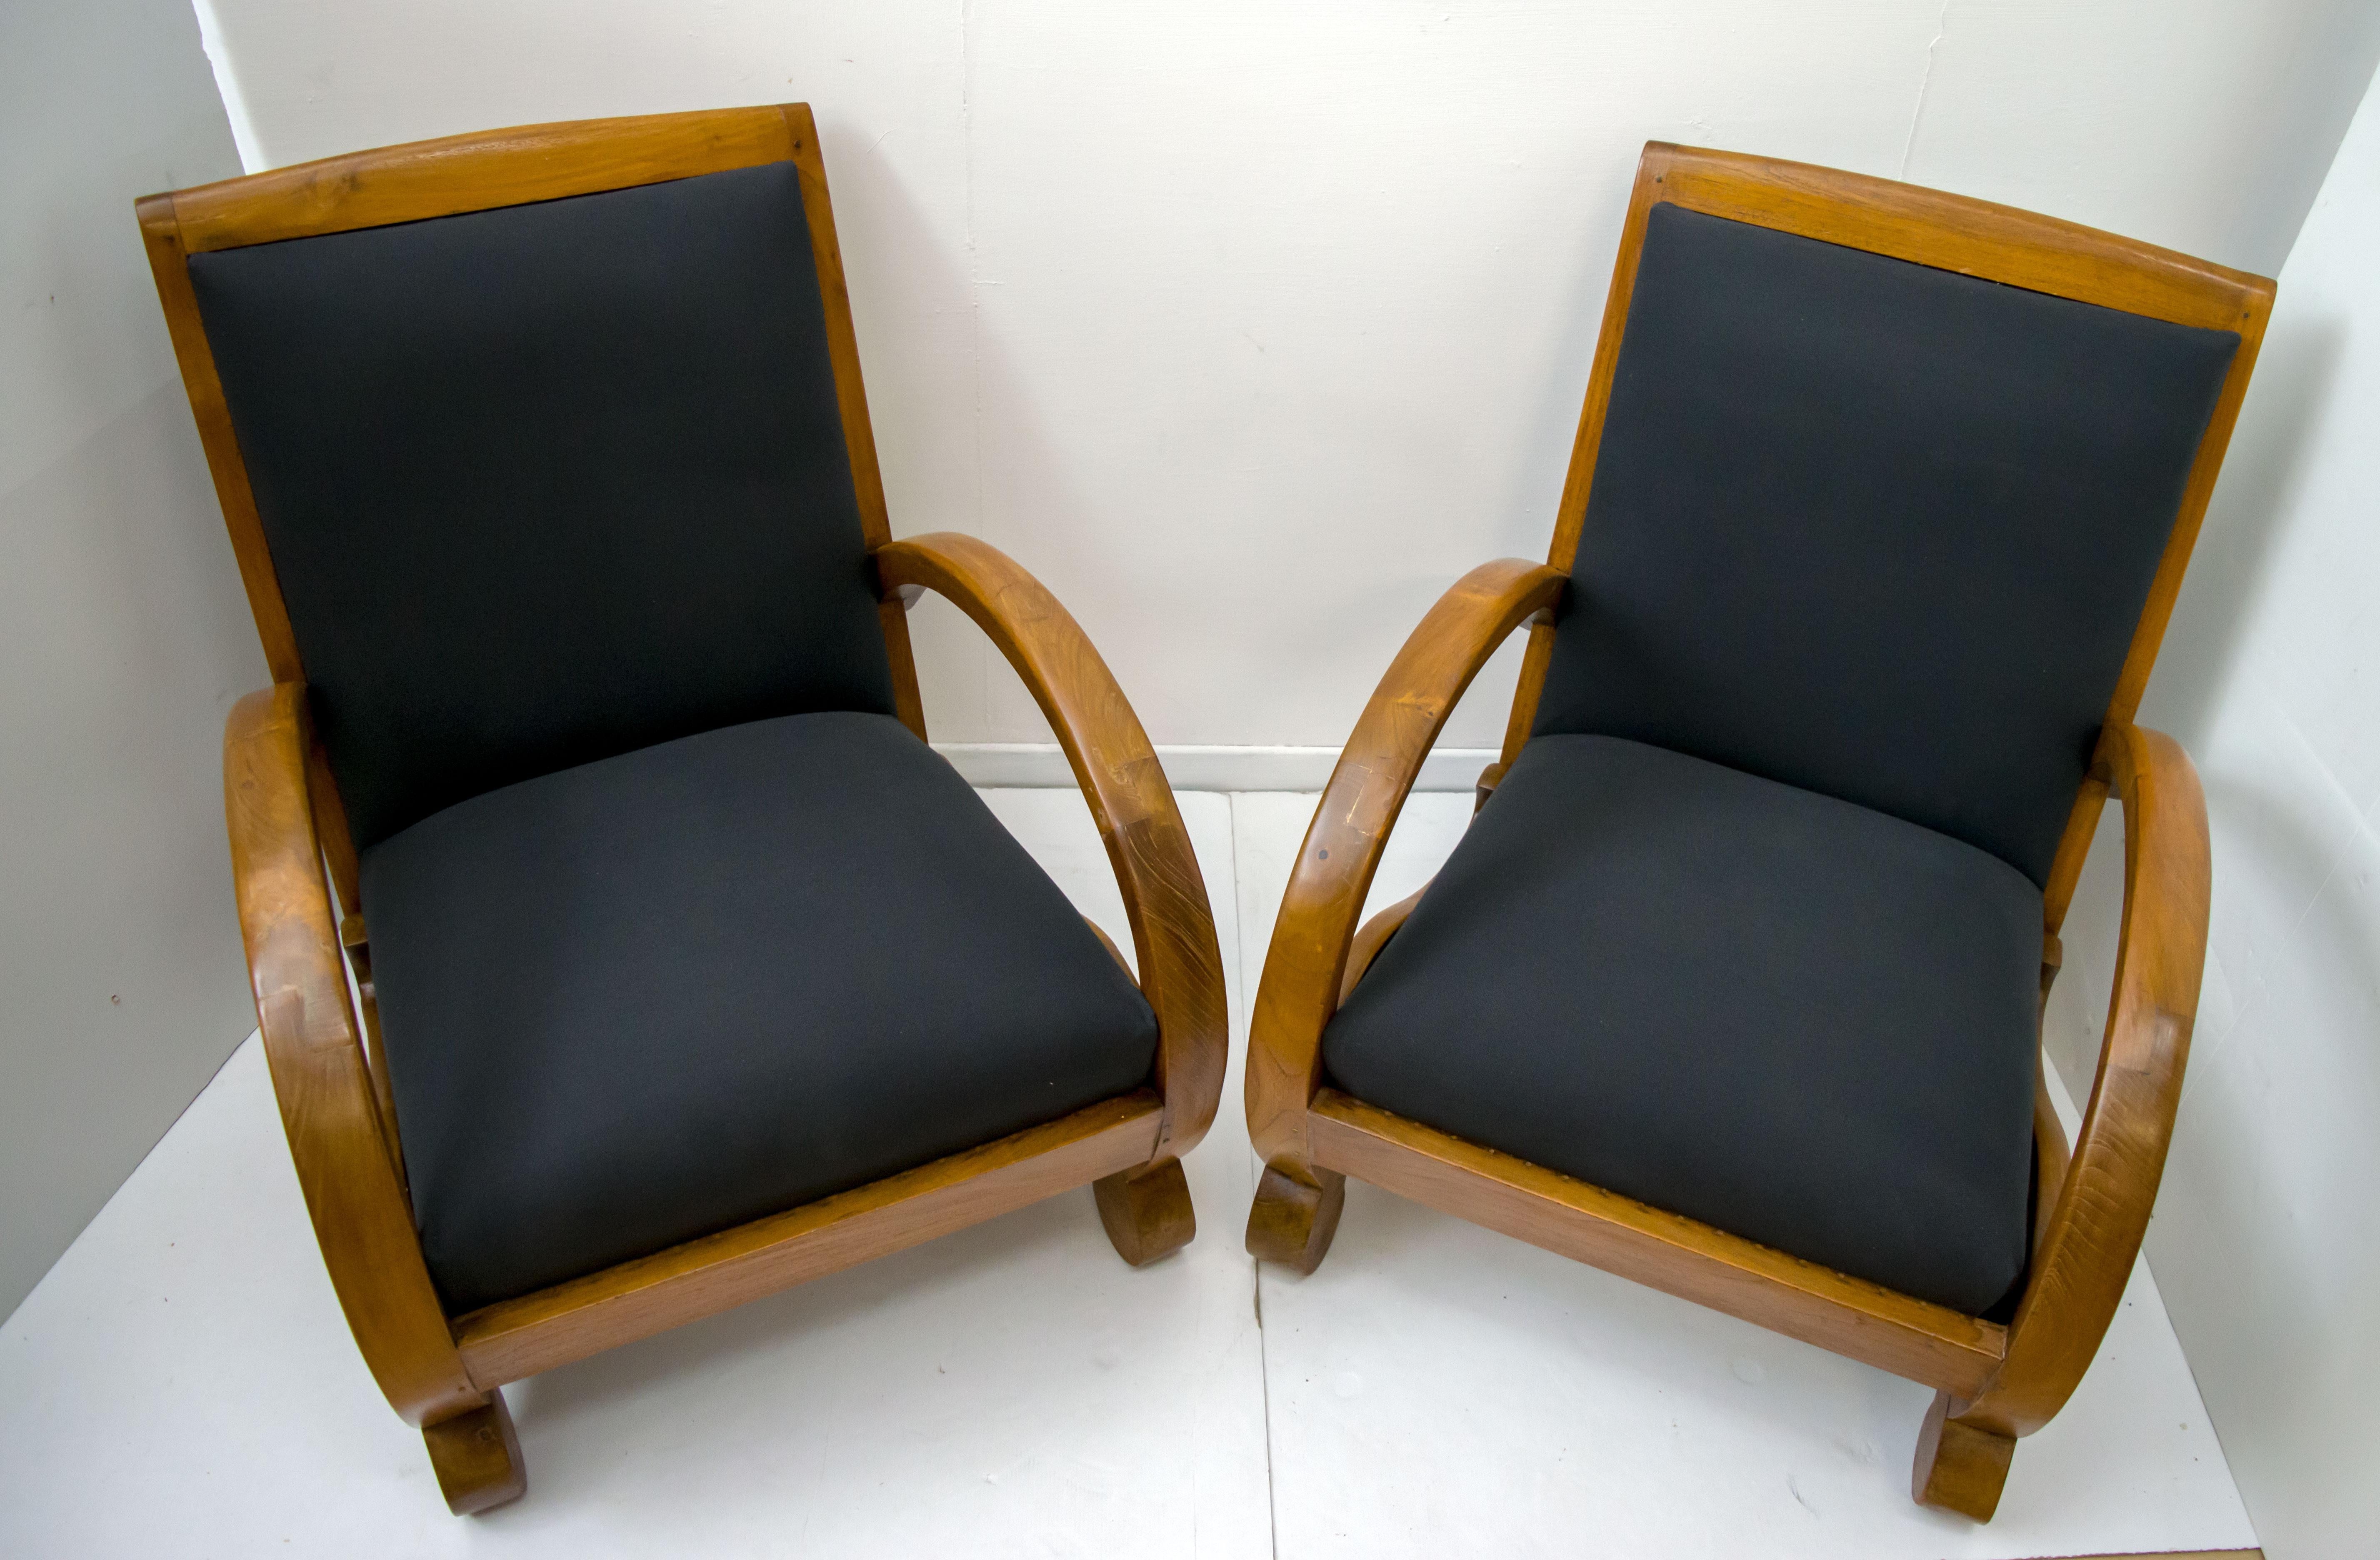 Pair of deco armchairs in Italian walnut from the early 1900s, covered in black fabric.